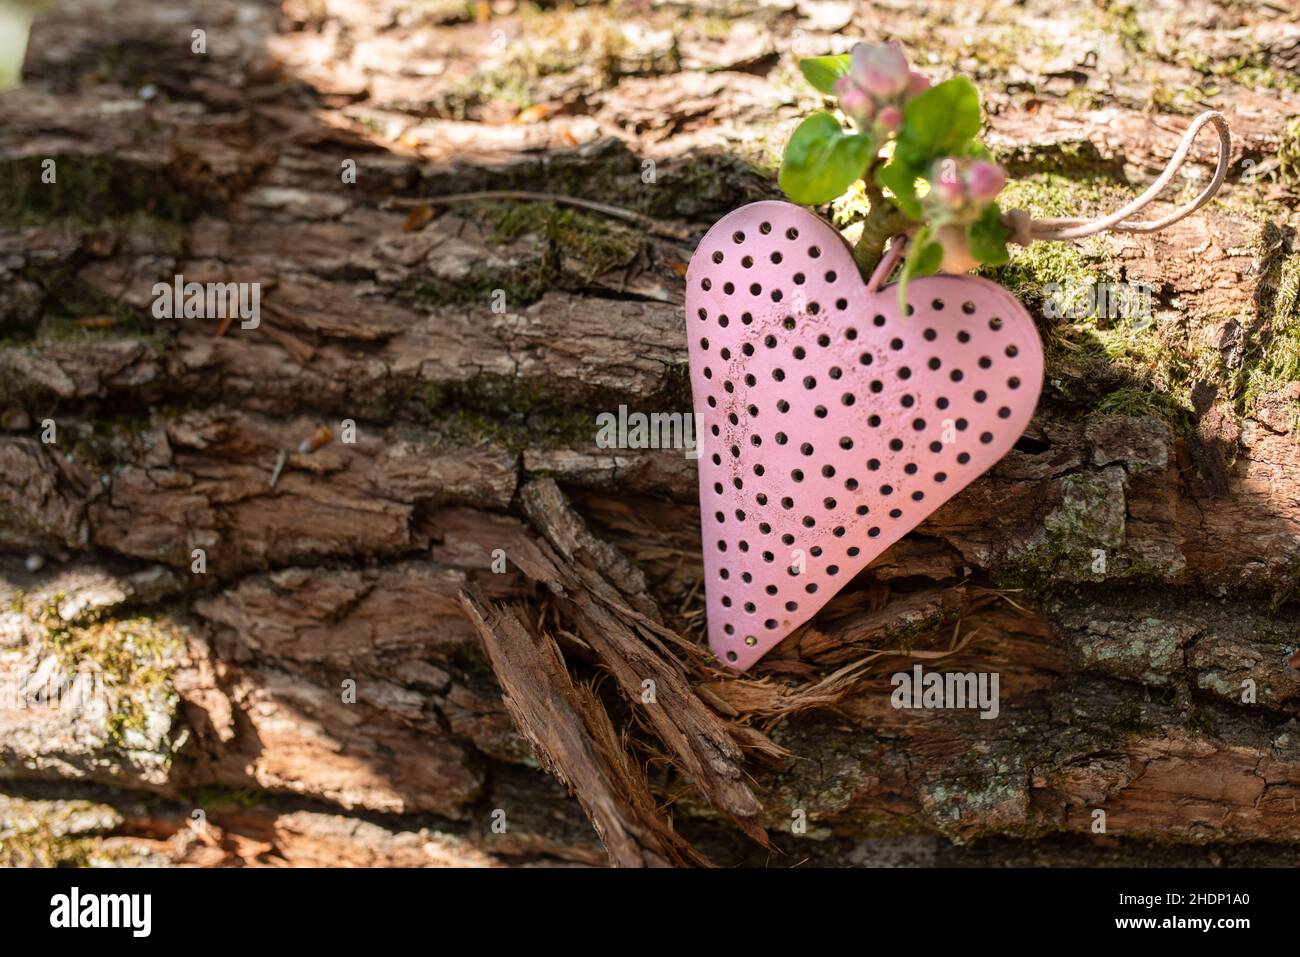 mothers day, cordially, heart shaped, mothers days, cordiallies, heart-shapeds Stock Photo